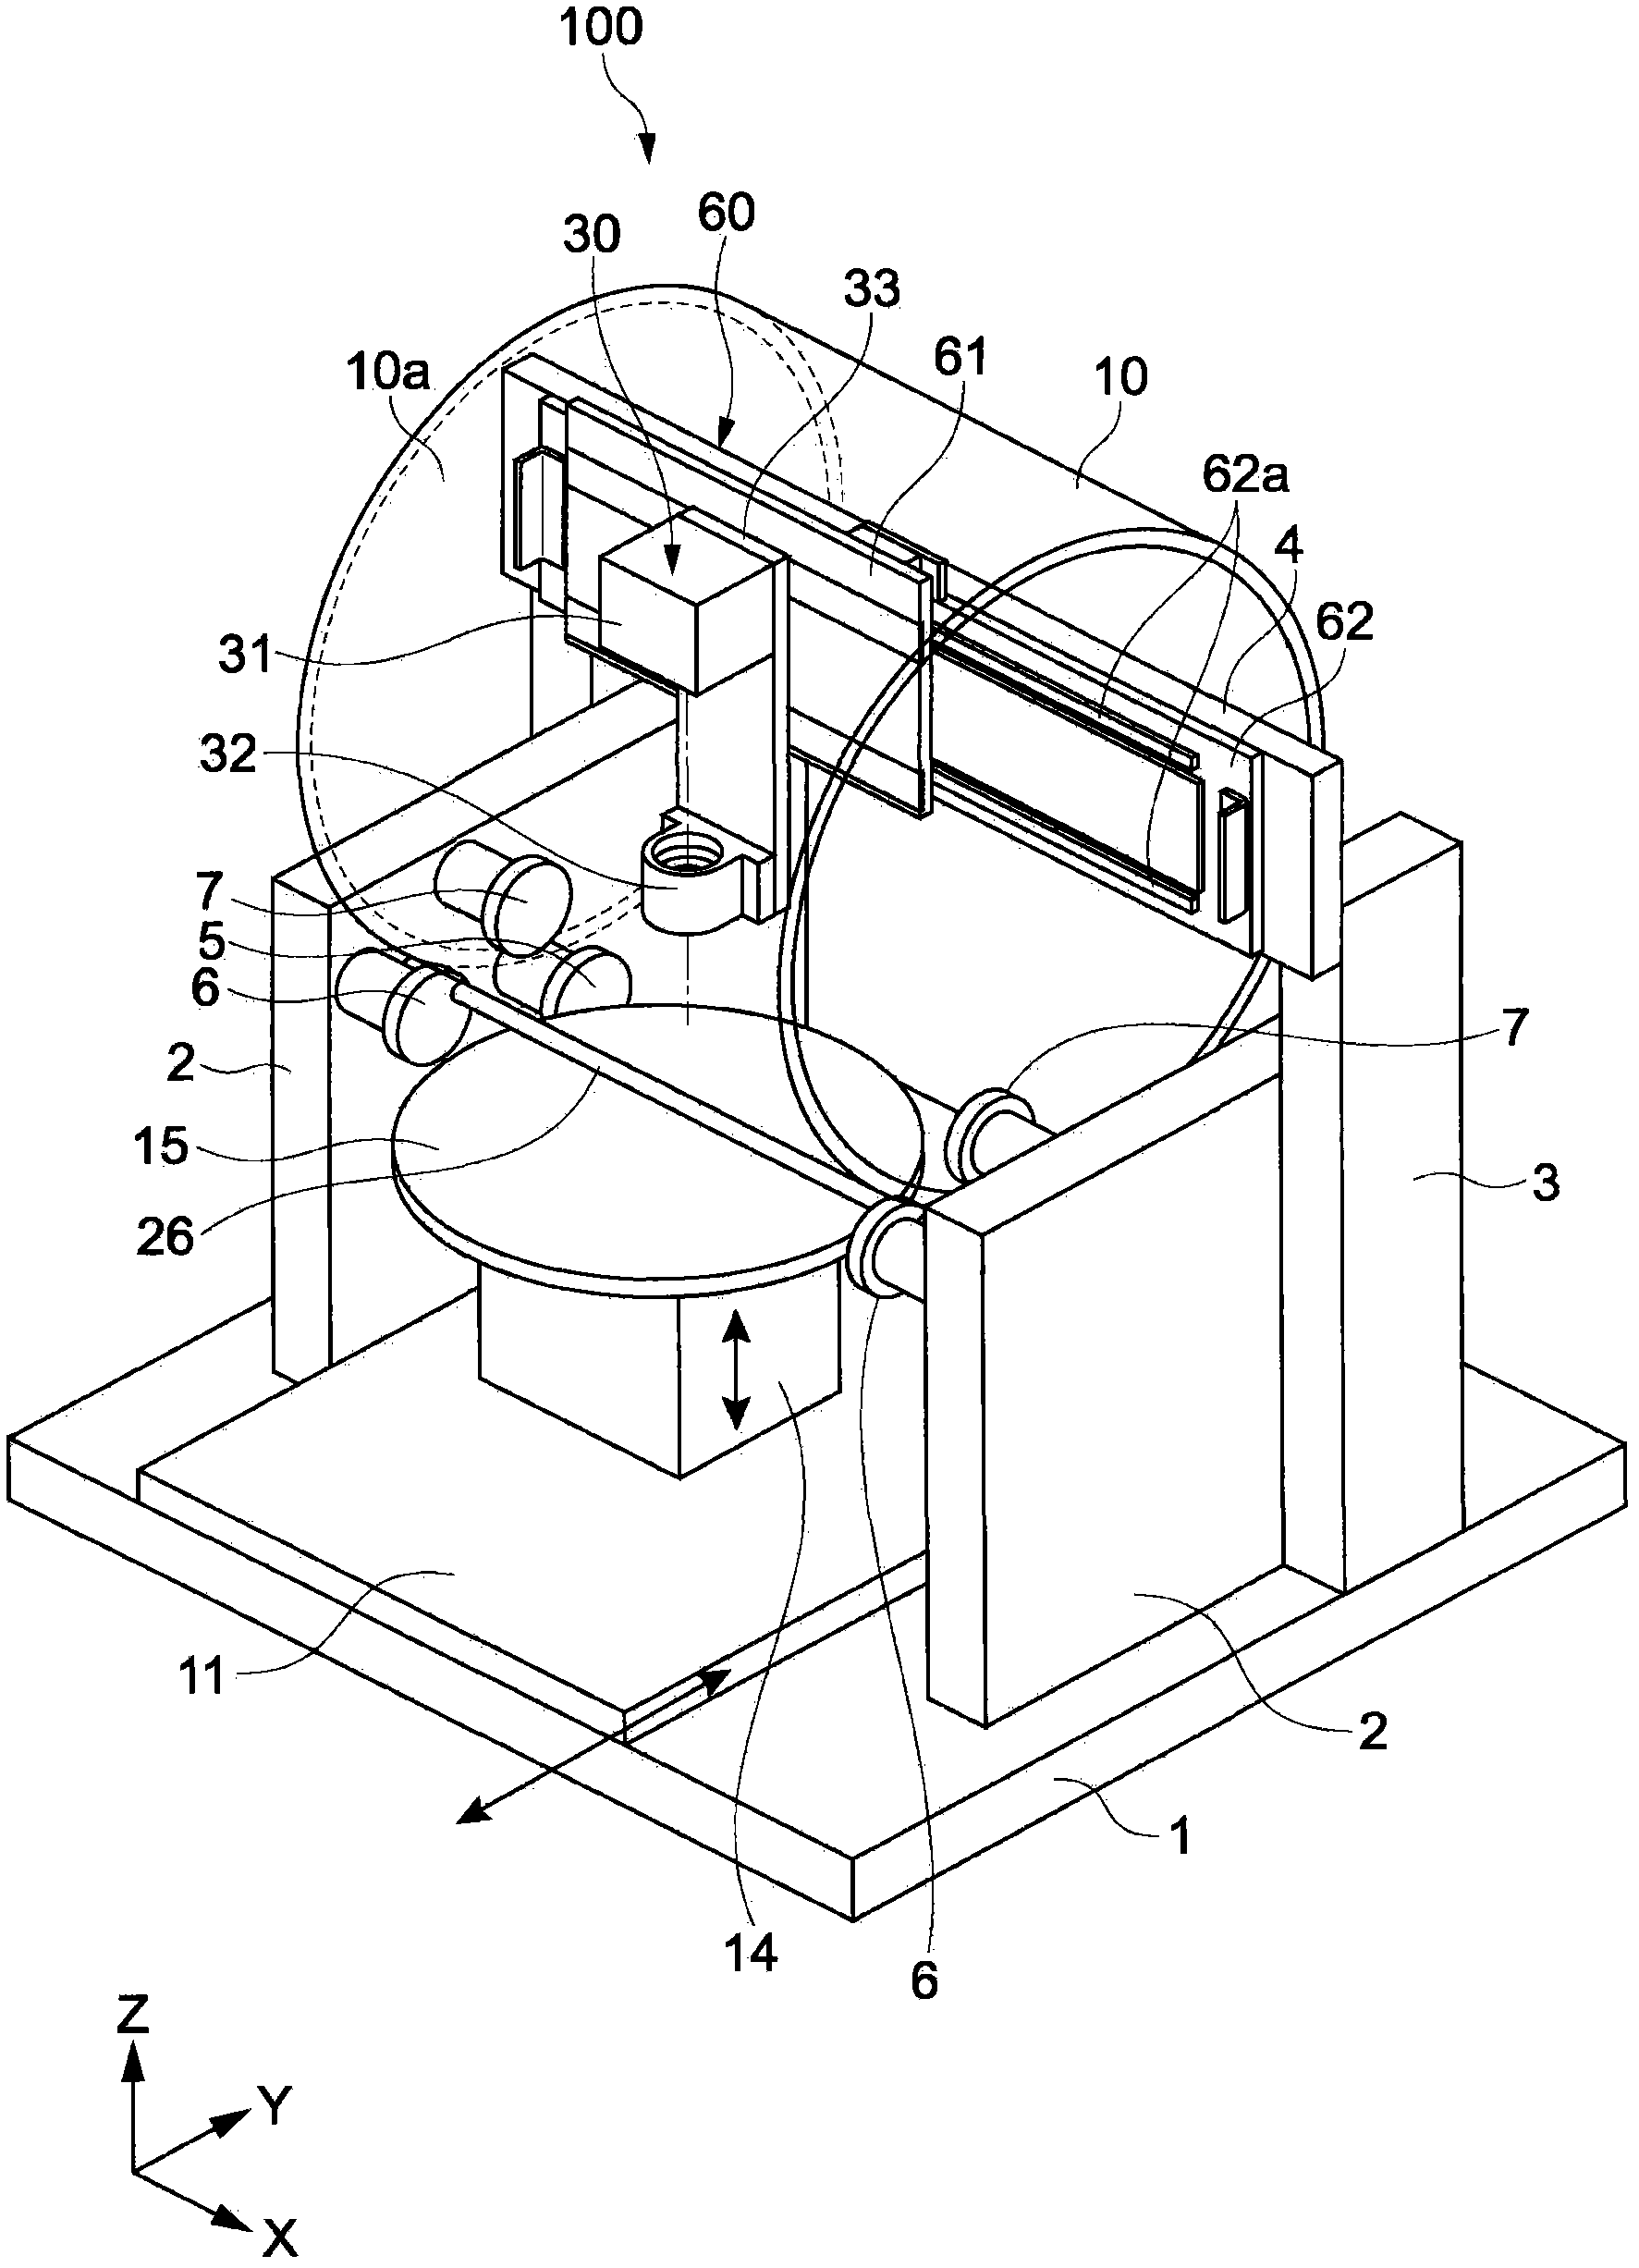 Three-dimensional modeling apparatus, object, and method of manufacturing an object